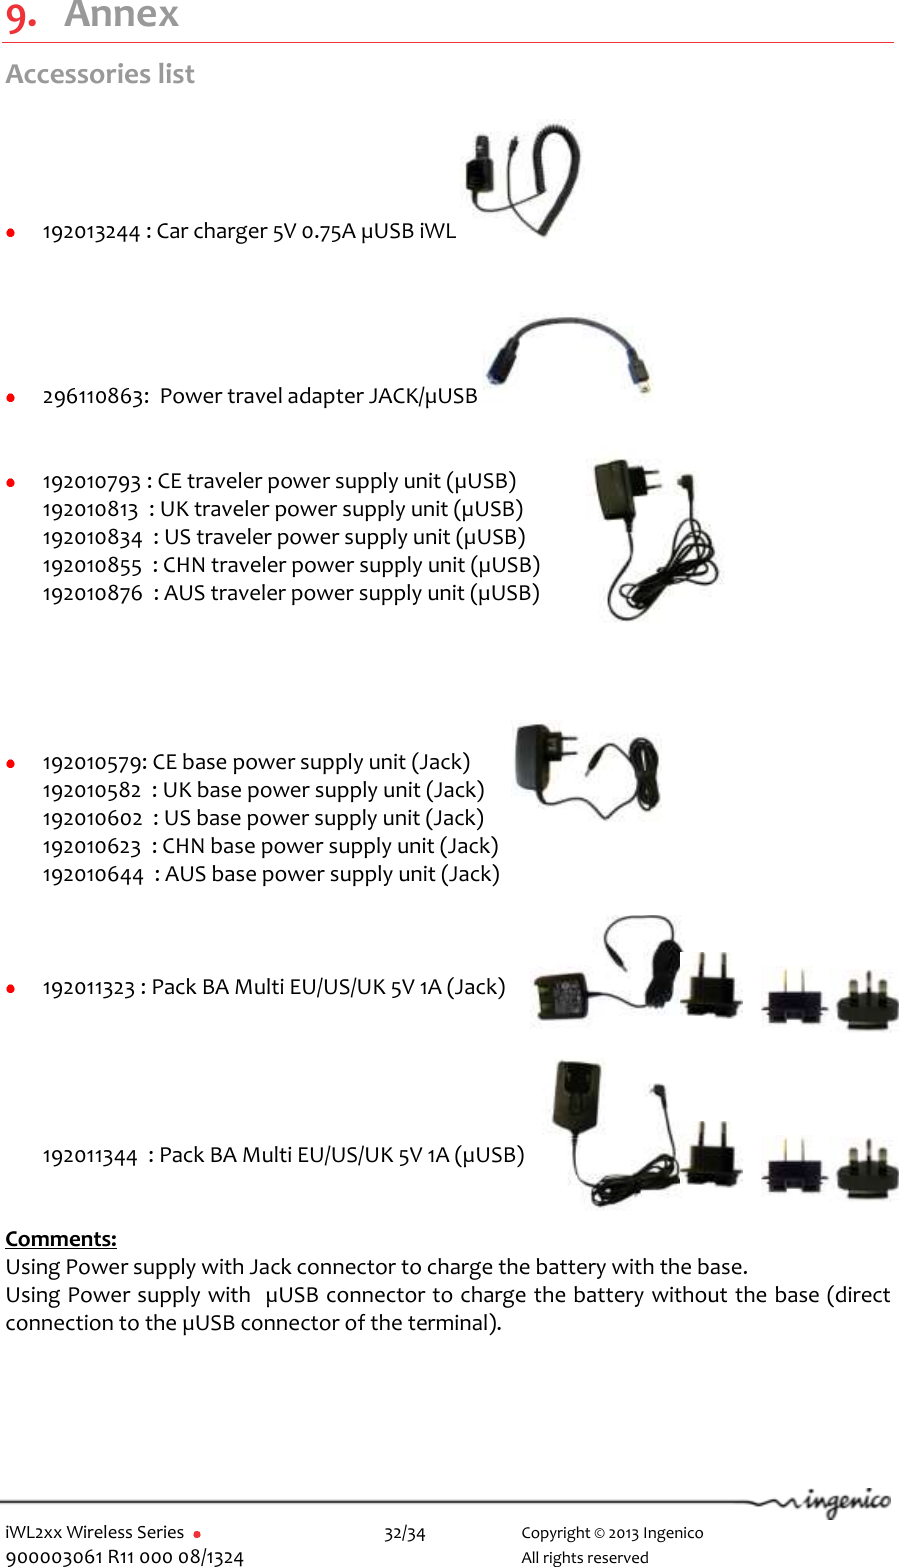  iWL2xx Wireless Series       32/34    Copyright © 2013 Ingenico 900003061 R11 000 08/1324      All rights reserved  9. Annex Accessories list   192013244 : Car charger 5V 0.75A µUSB iWL      296110863:  Power travel adapter JACK/µUSB      192010793 : CE traveler power supply unit (µUSB) 192010813  : UK traveler power supply unit (µUSB) 192010834  : US traveler power supply unit (µUSB) 192010855  : CHN traveler power supply unit (µUSB) 192010876  : AUS traveler power supply unit (µUSB)       192010579: CE base power supply unit (Jack) 192010582  : UK base power supply unit (Jack) 192010602  : US base power supply unit (Jack) 192010623  : CHN base power supply unit (Jack) 192010644  : AUS base power supply unit (Jack)     192011323 : Pack BA Multi EU/US/UK 5V 1A (Jack)      192011344  : Pack BA Multi EU/US/UK 5V 1A (µUSB)   Comments: Using Power supply with Jack connector to charge the battery with the base. Using Power supply with  µUSB connector to charge the battery without the base (direct connection to the µUSB connector of the terminal).  